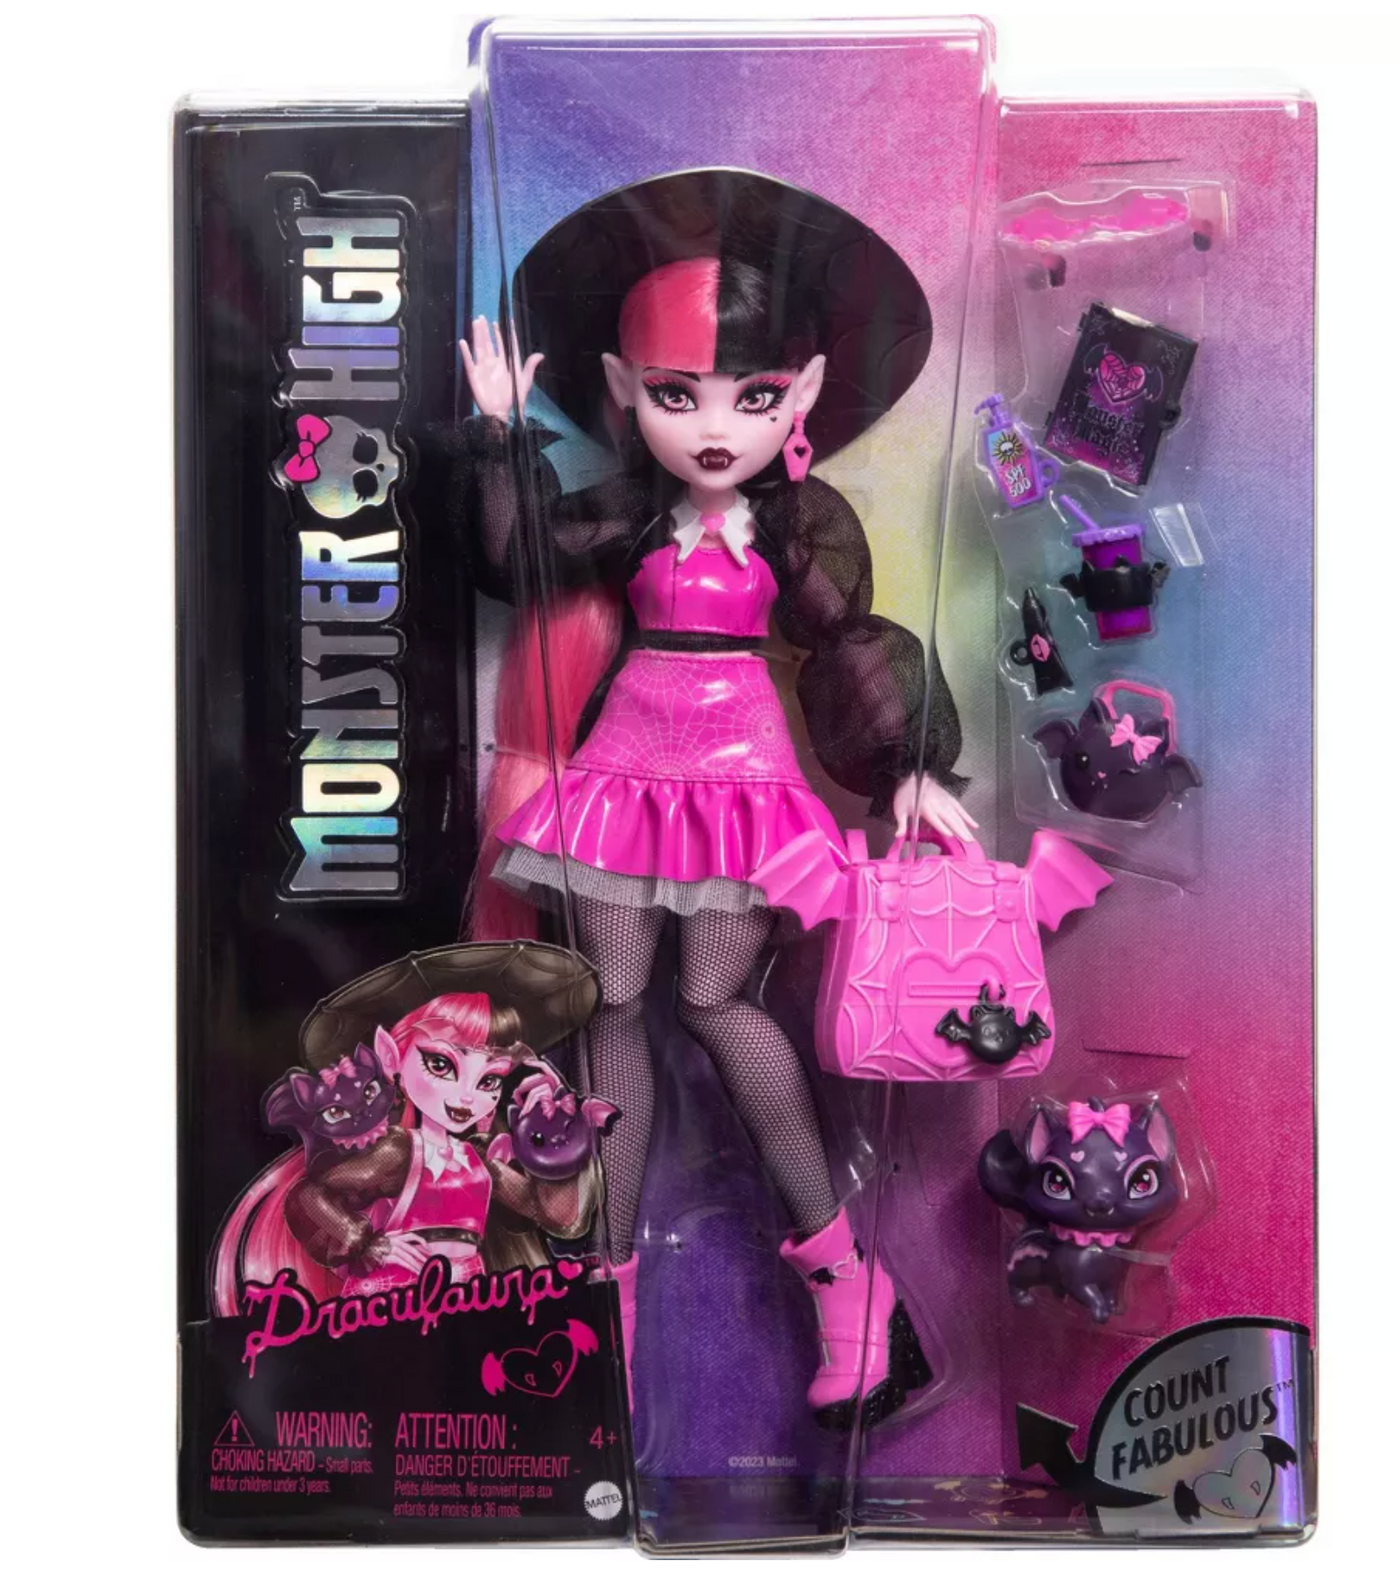 Mattel Monster High Draculaura Fashion Doll w Pet Count Fabulous Accessories New